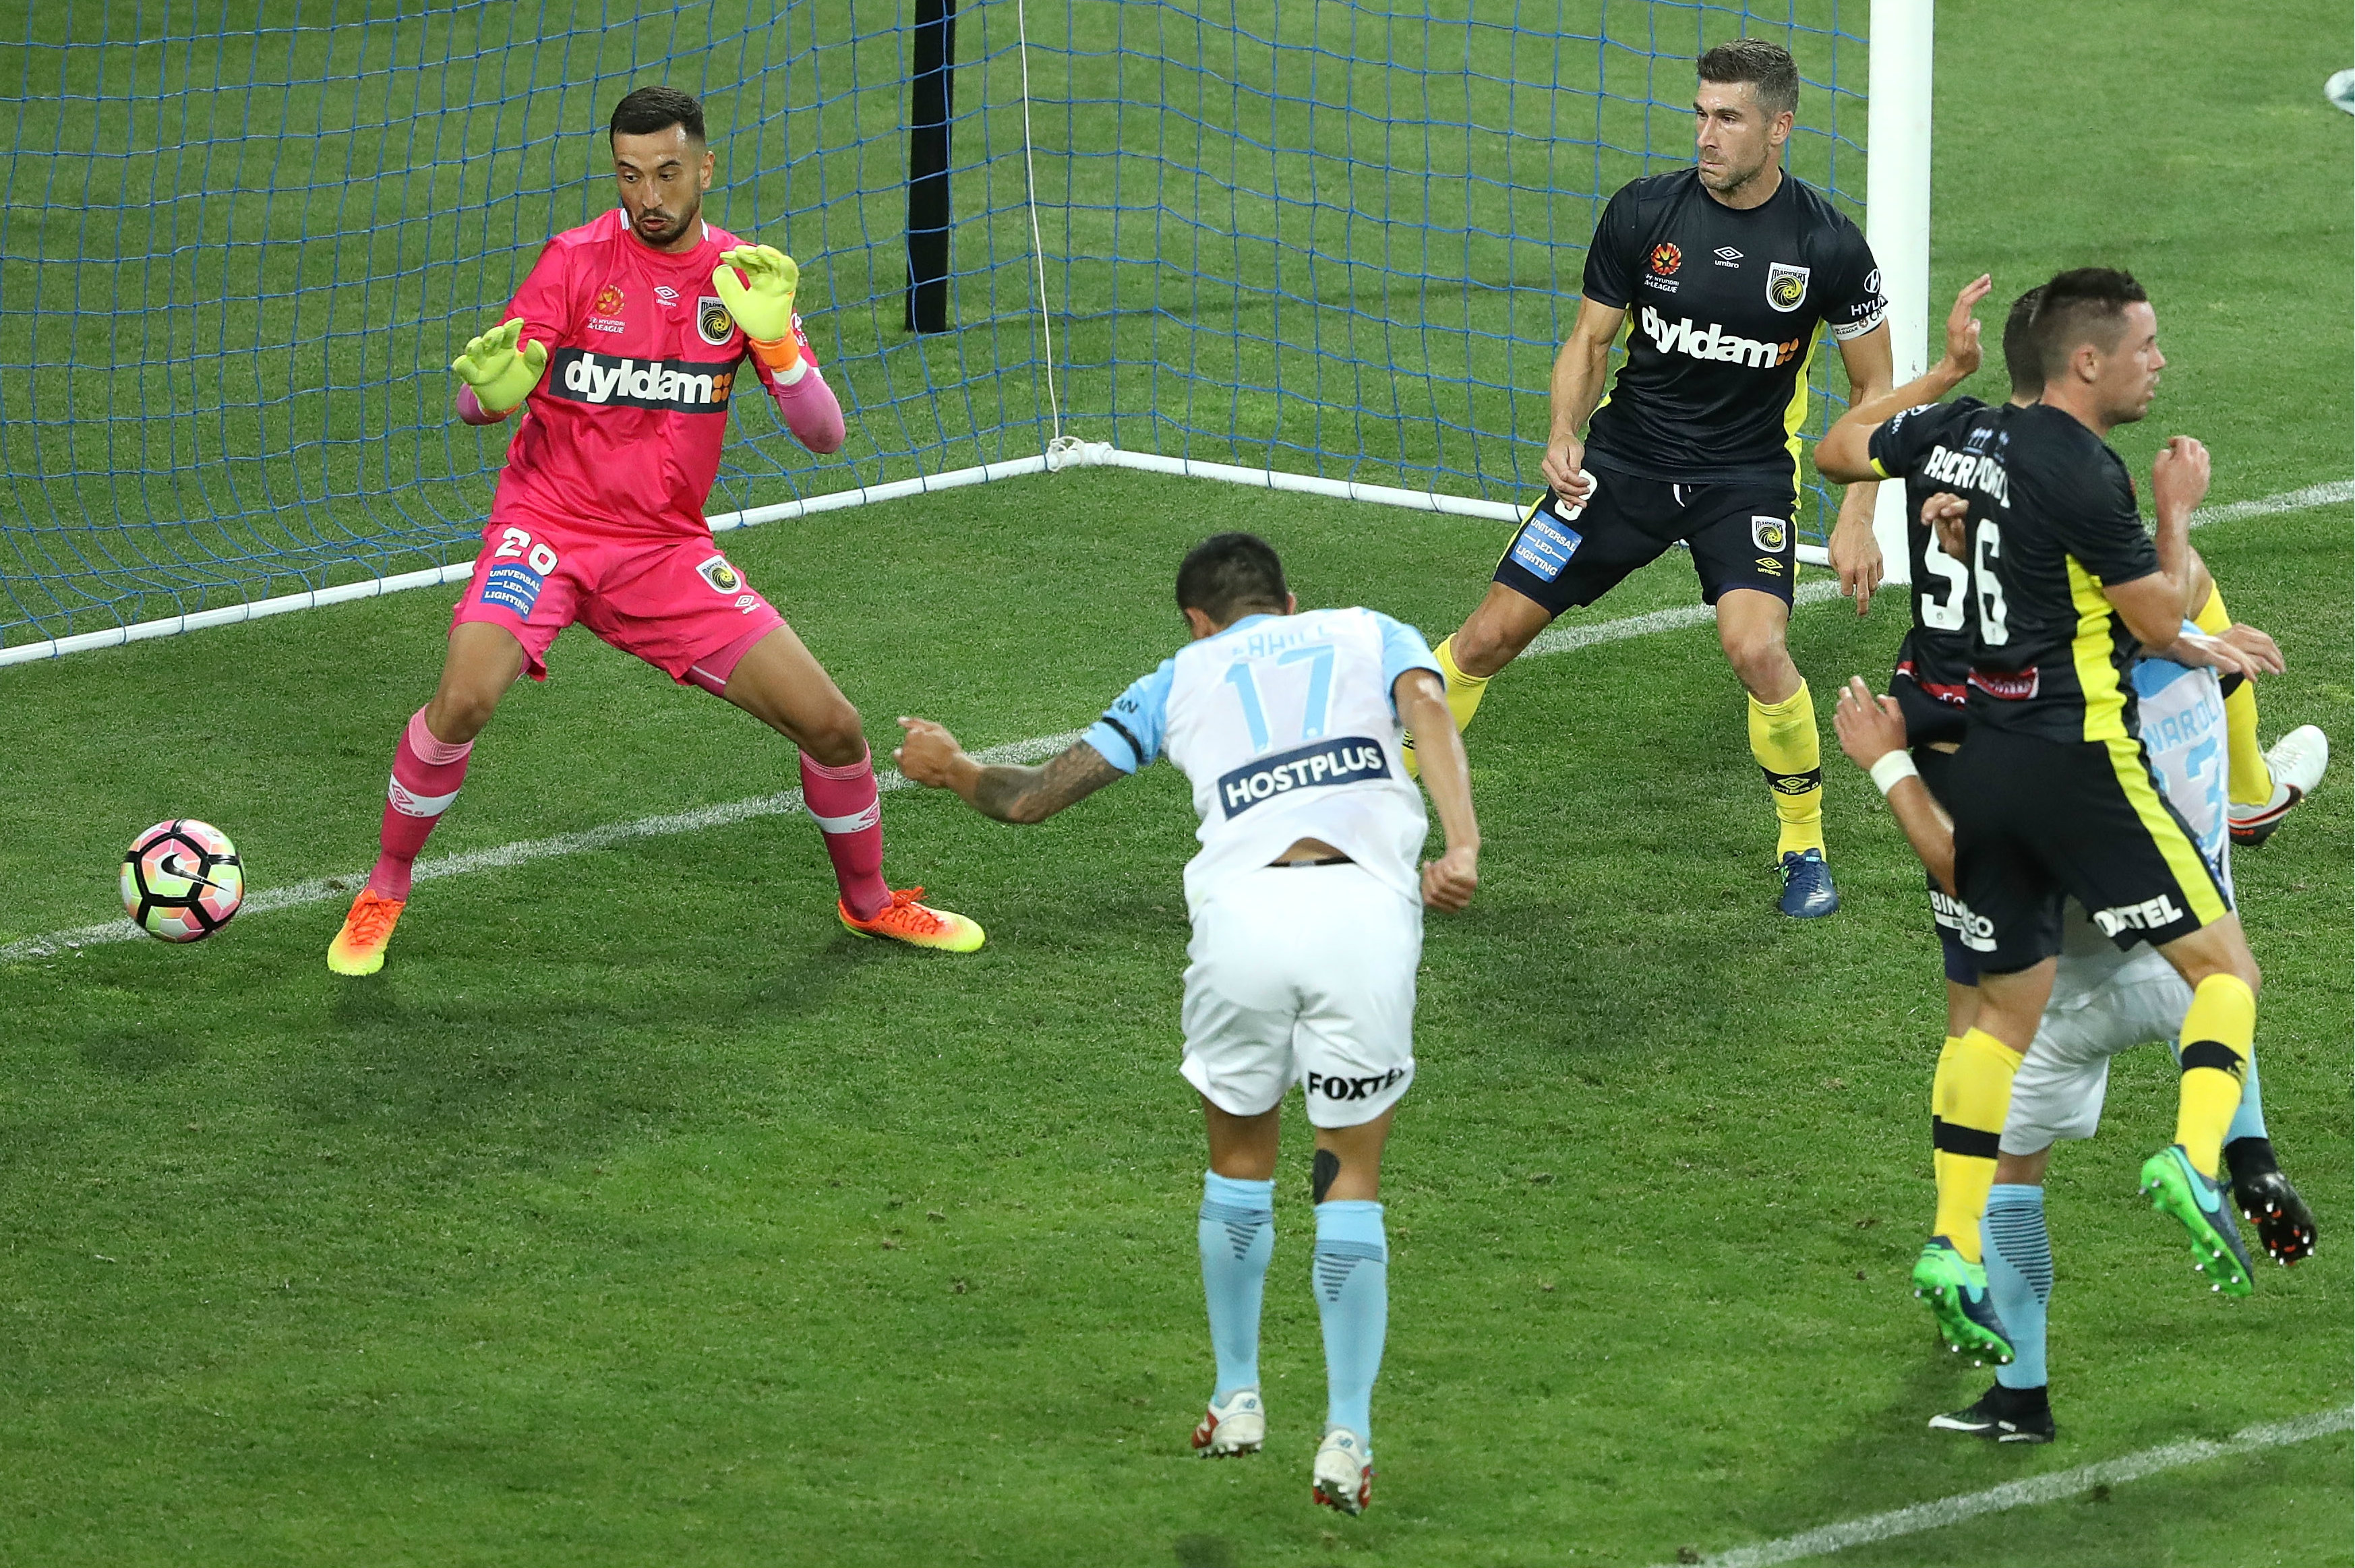 A trademark header completed his brace against the Mariners.